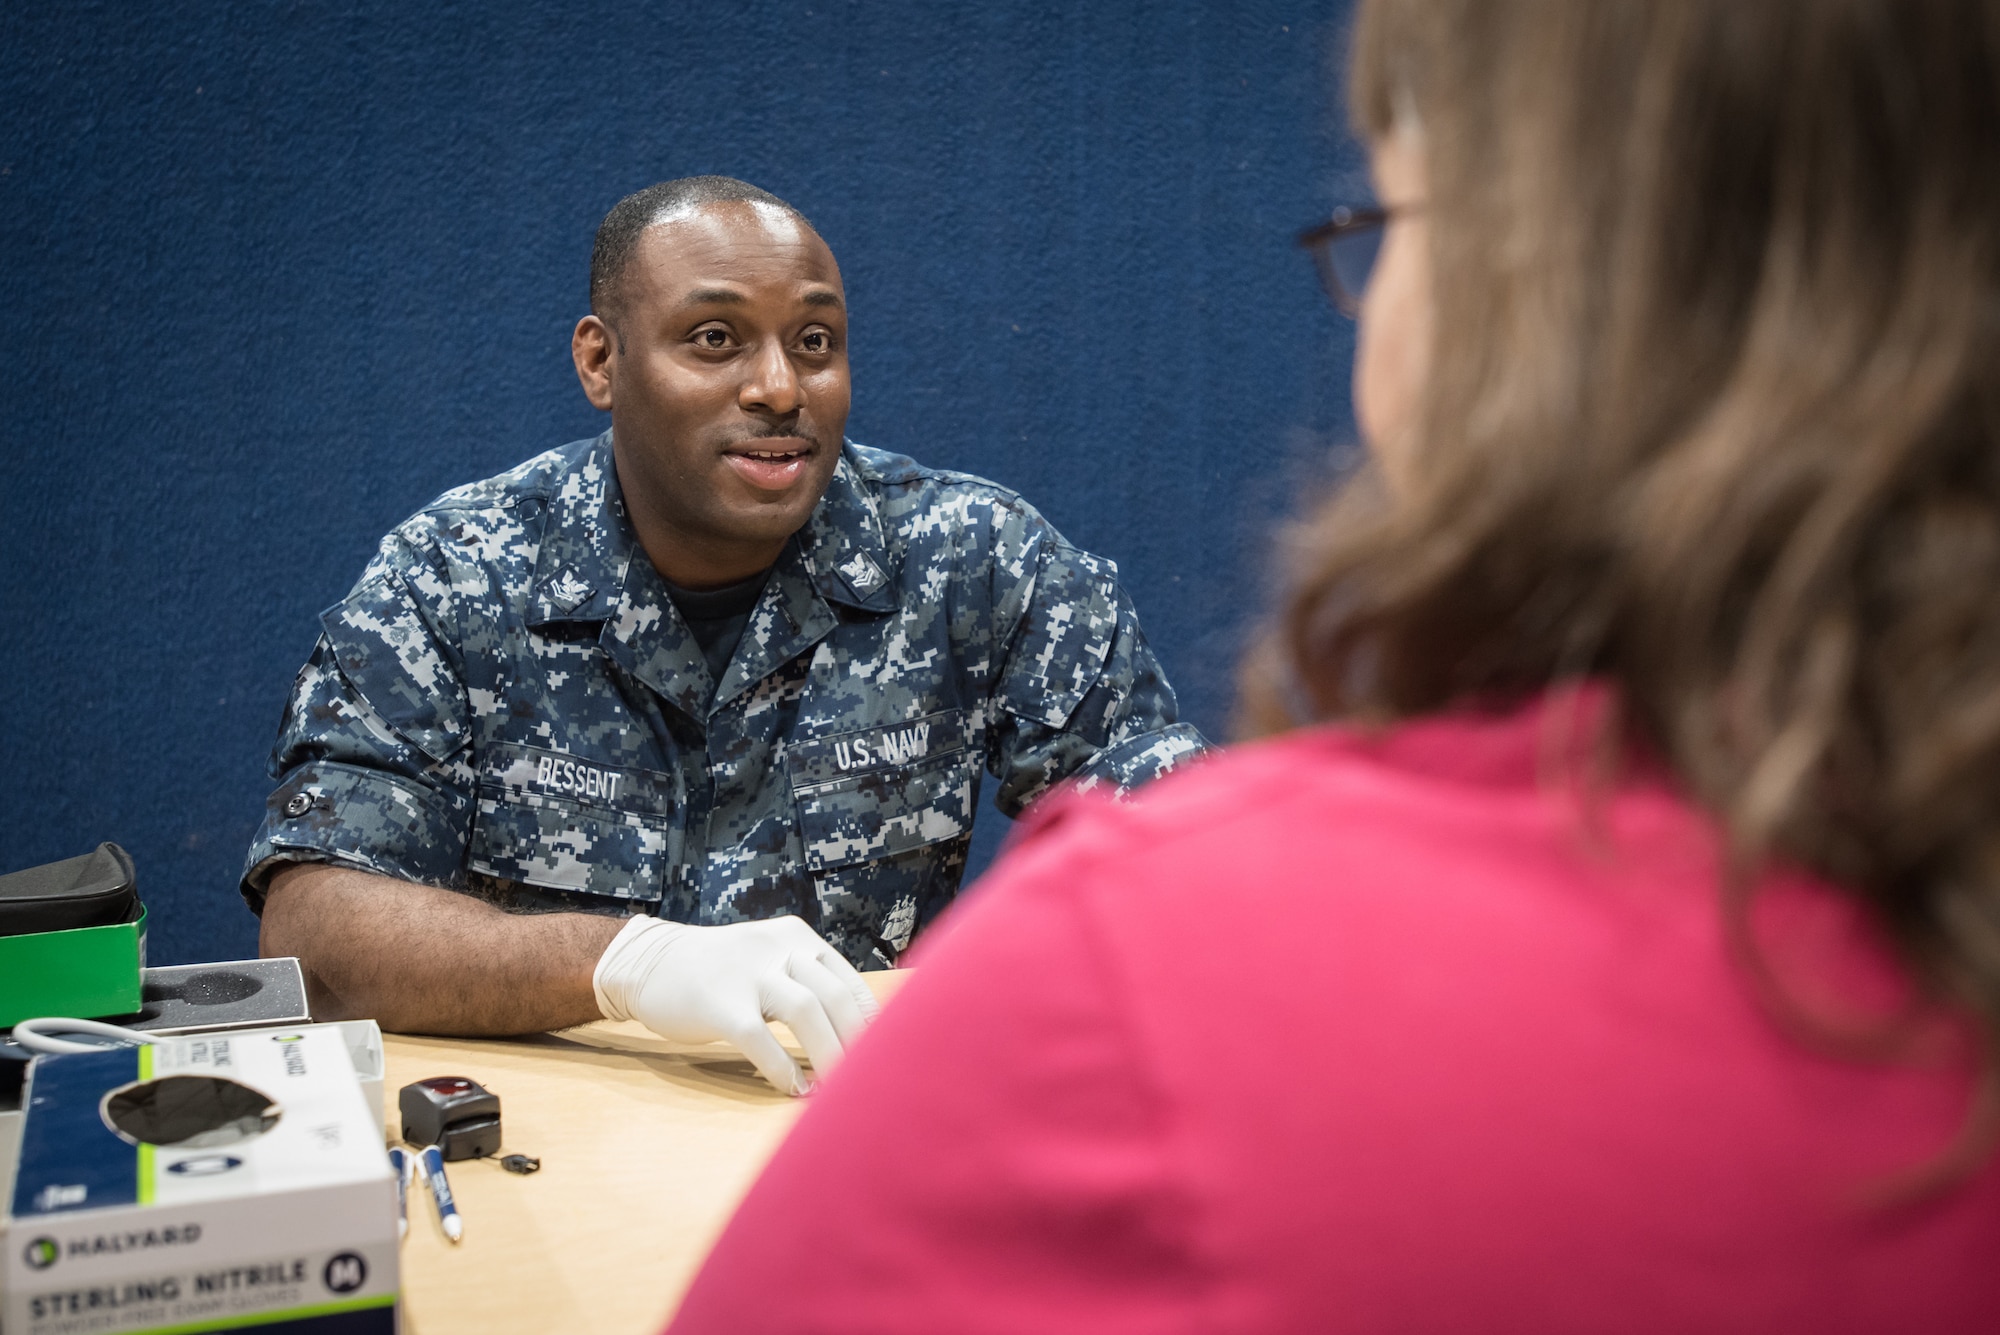 U.S. Navy HM2 Frederick Bessent, a medical support sailor from Naval Operation Support Center in Pittsburgh, takes the medical history of a local resident at a no-cost health-care clinic at Lee County High School in Beattyville, Ky., June 15, 2018. The clinic is one of four that was staffed by military health-care professionals in Eastern Kentucky from June 15 to June 24 as part of an Innovative Readiness Training mission called Operation Bobcat. The mission provided military forces with crucial expeditionary training while offering no-cost medical, dental and optometry care to area residents. (U.S. Air National Guard photo by Lt. Col. Dale Greer)